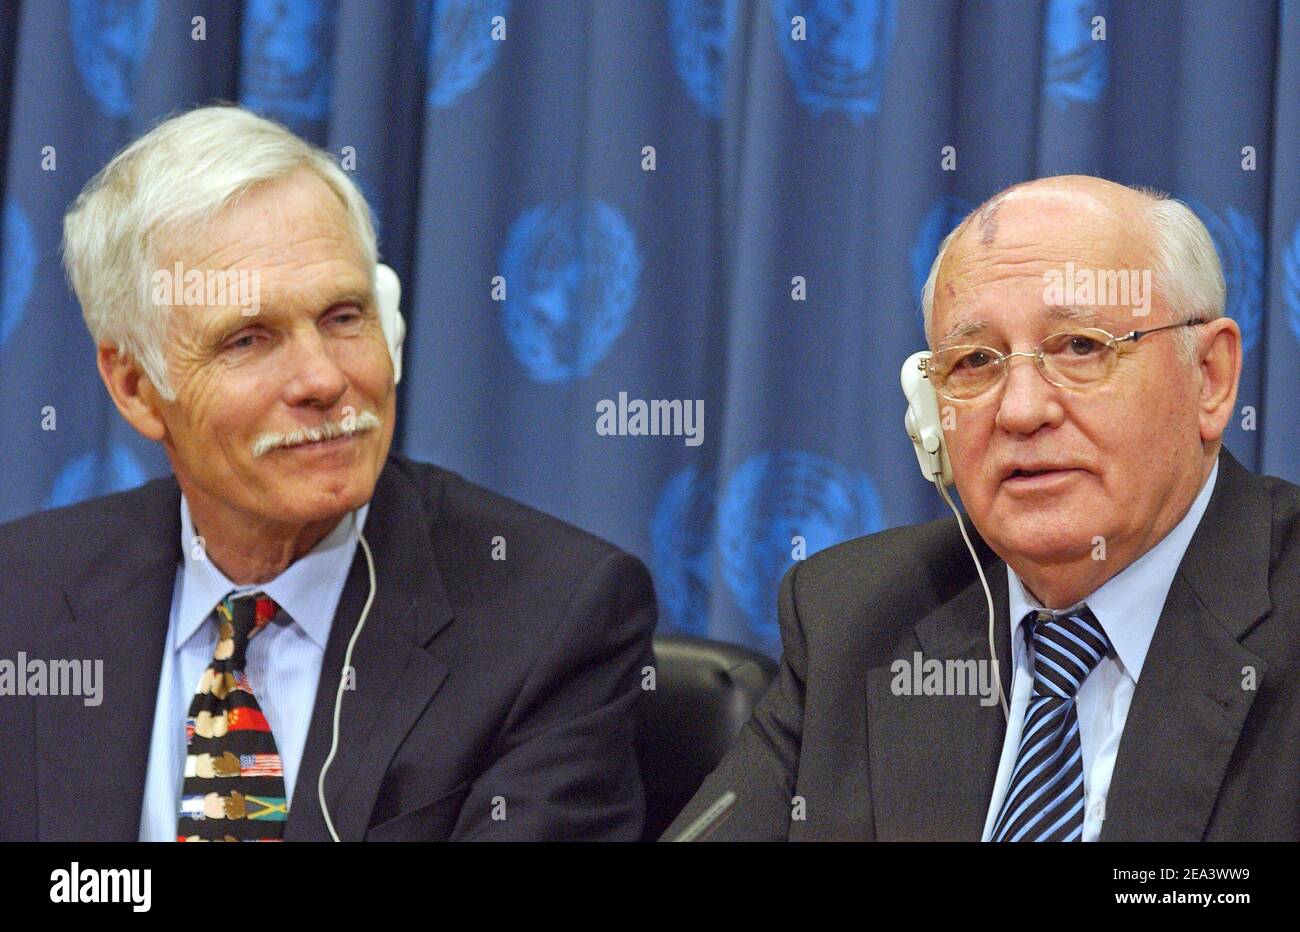 Media mogul Ted Turner (left) and former USSR President Mikhail Gorbachev (right) announced Ted Turner as the recipient of the 2005 Alan Cranston Peace Award (to be presented by Gorbachev) during a news conference held at the United Nations headquarters in New York, on Wednesday April 20, 2005. Media mogul Ted Turner (left) and former USSR President Mikhail Gorbachev (right) announced Ted Turner as the recipient of the 2005 Alan Cranston Peace Award (to be presented by Gorbachev) during a news conference held at the United Nations headquarters in New York, on Wednesday April 20, 2005. Photo by Stock Photo